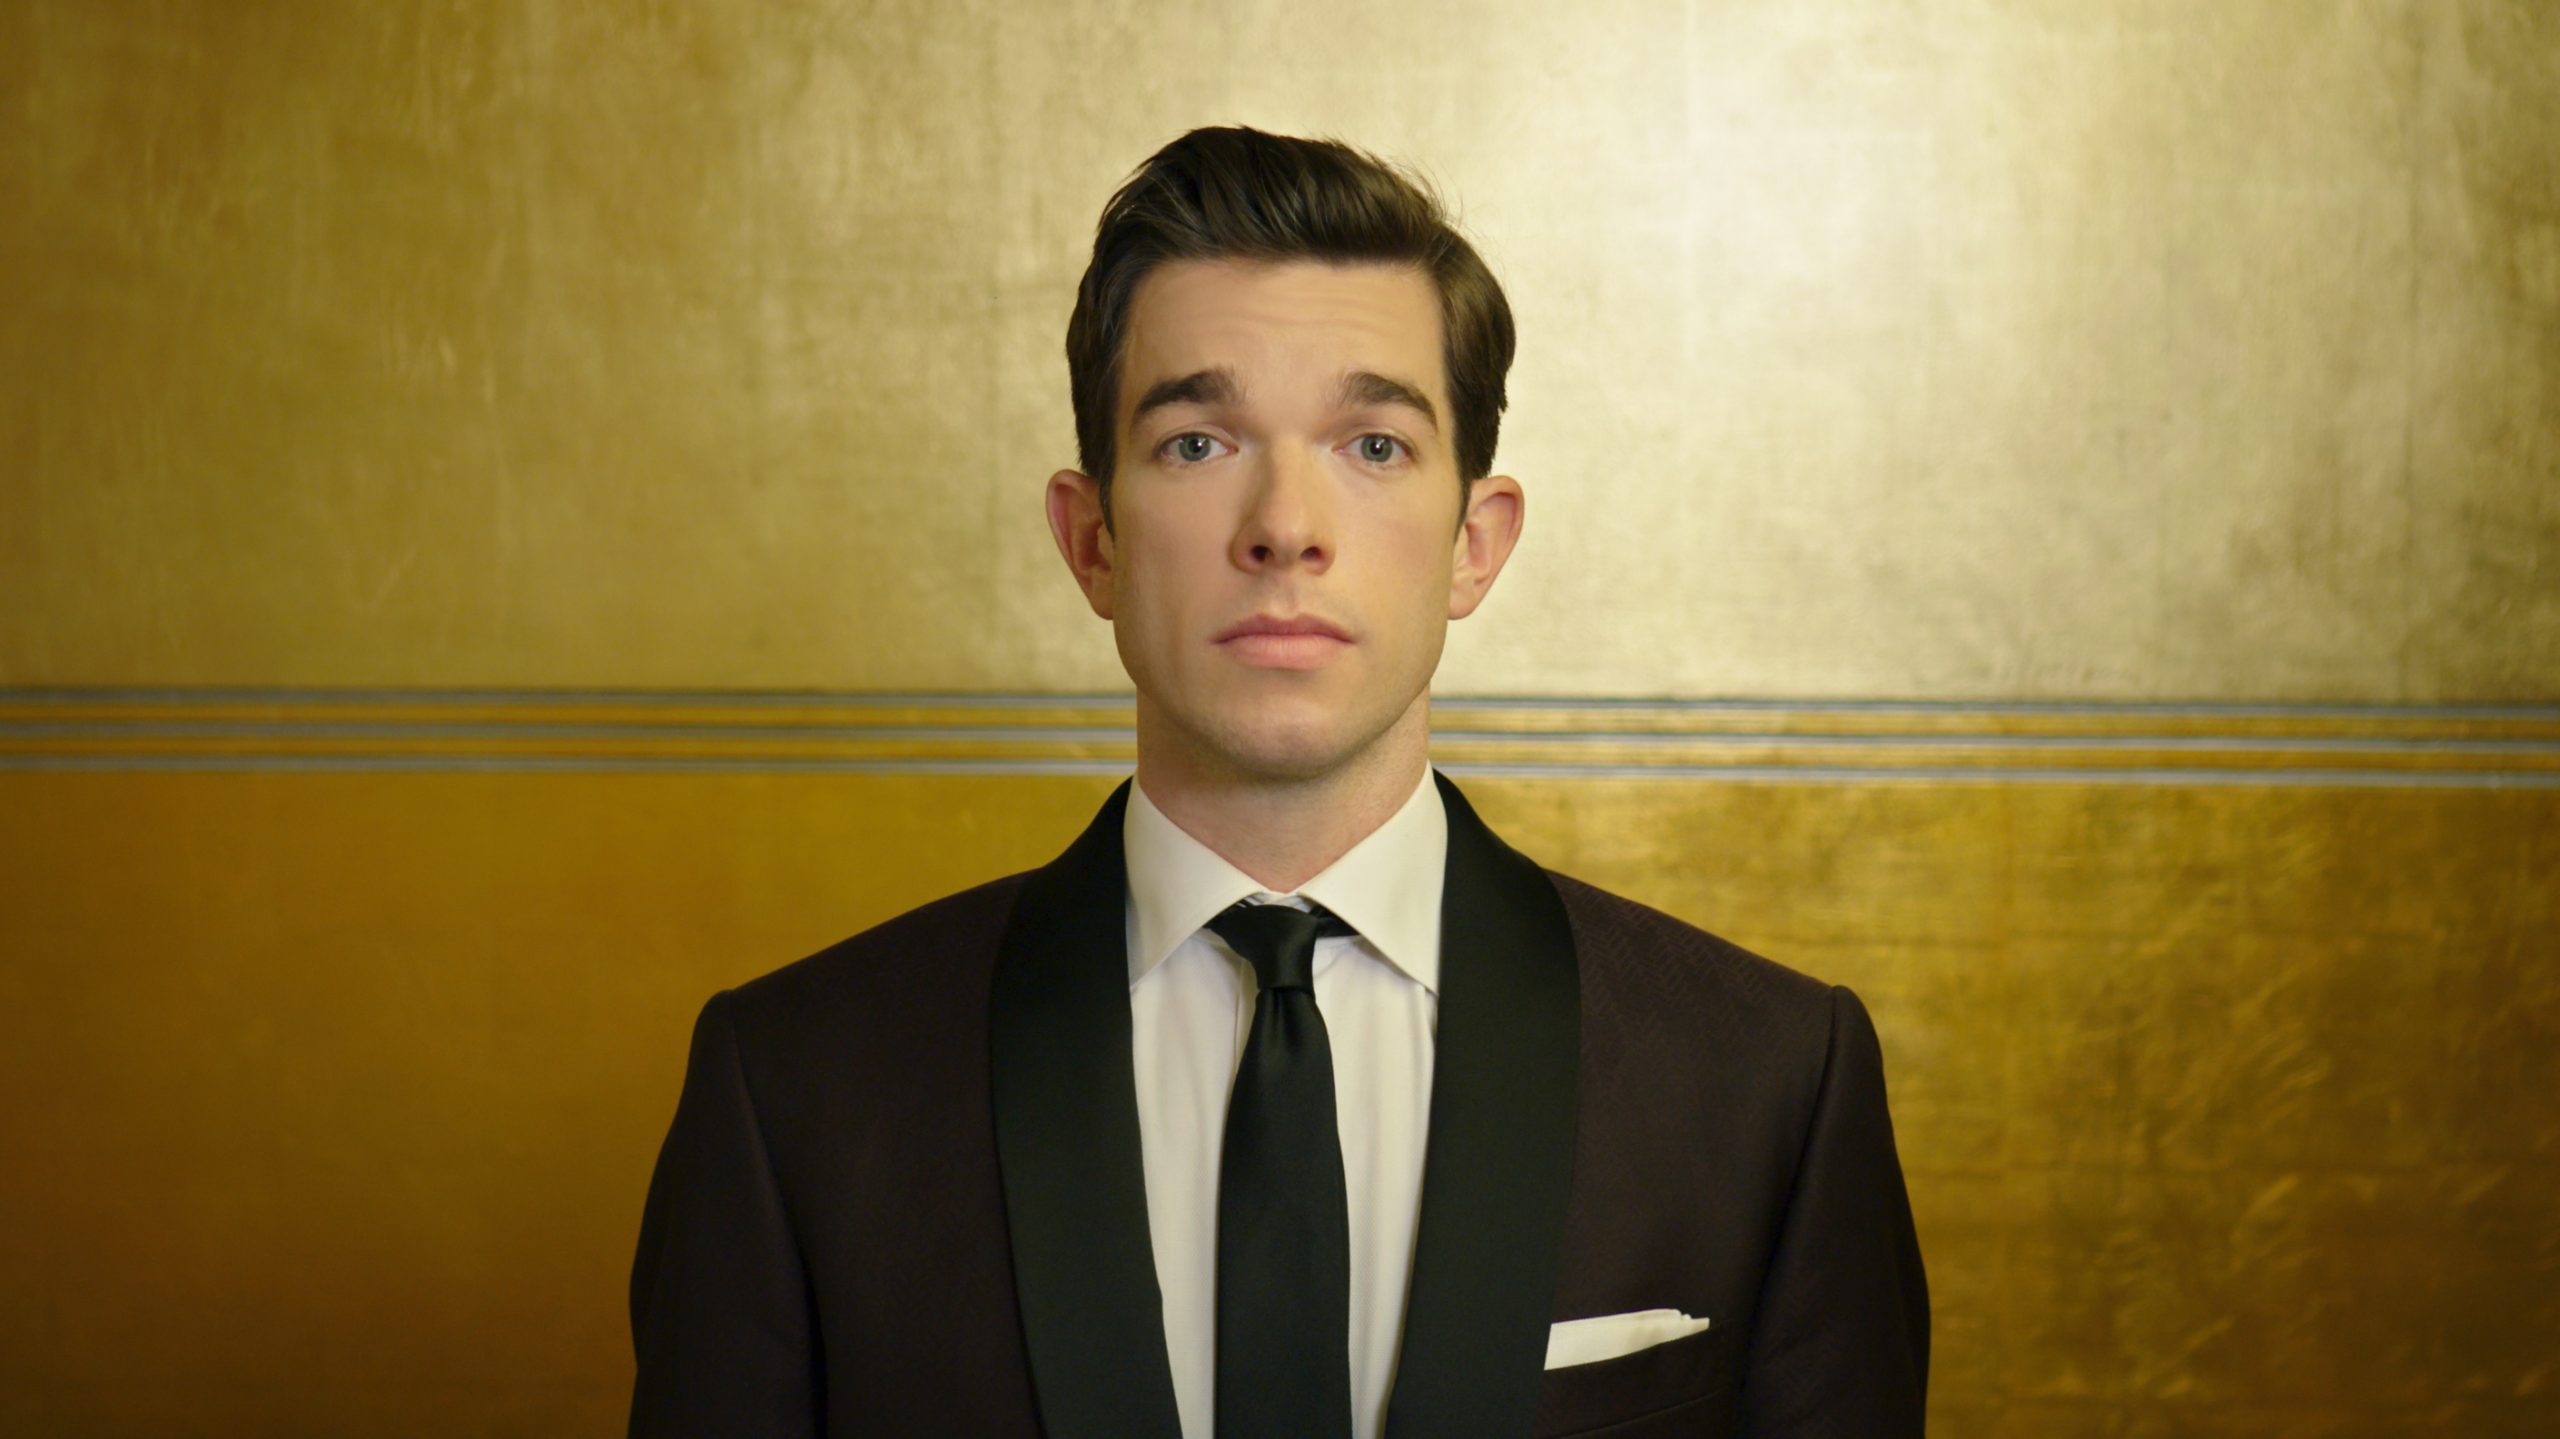 John Mulaney Wiki, Bio, Age, Net Worth, and Other Facts